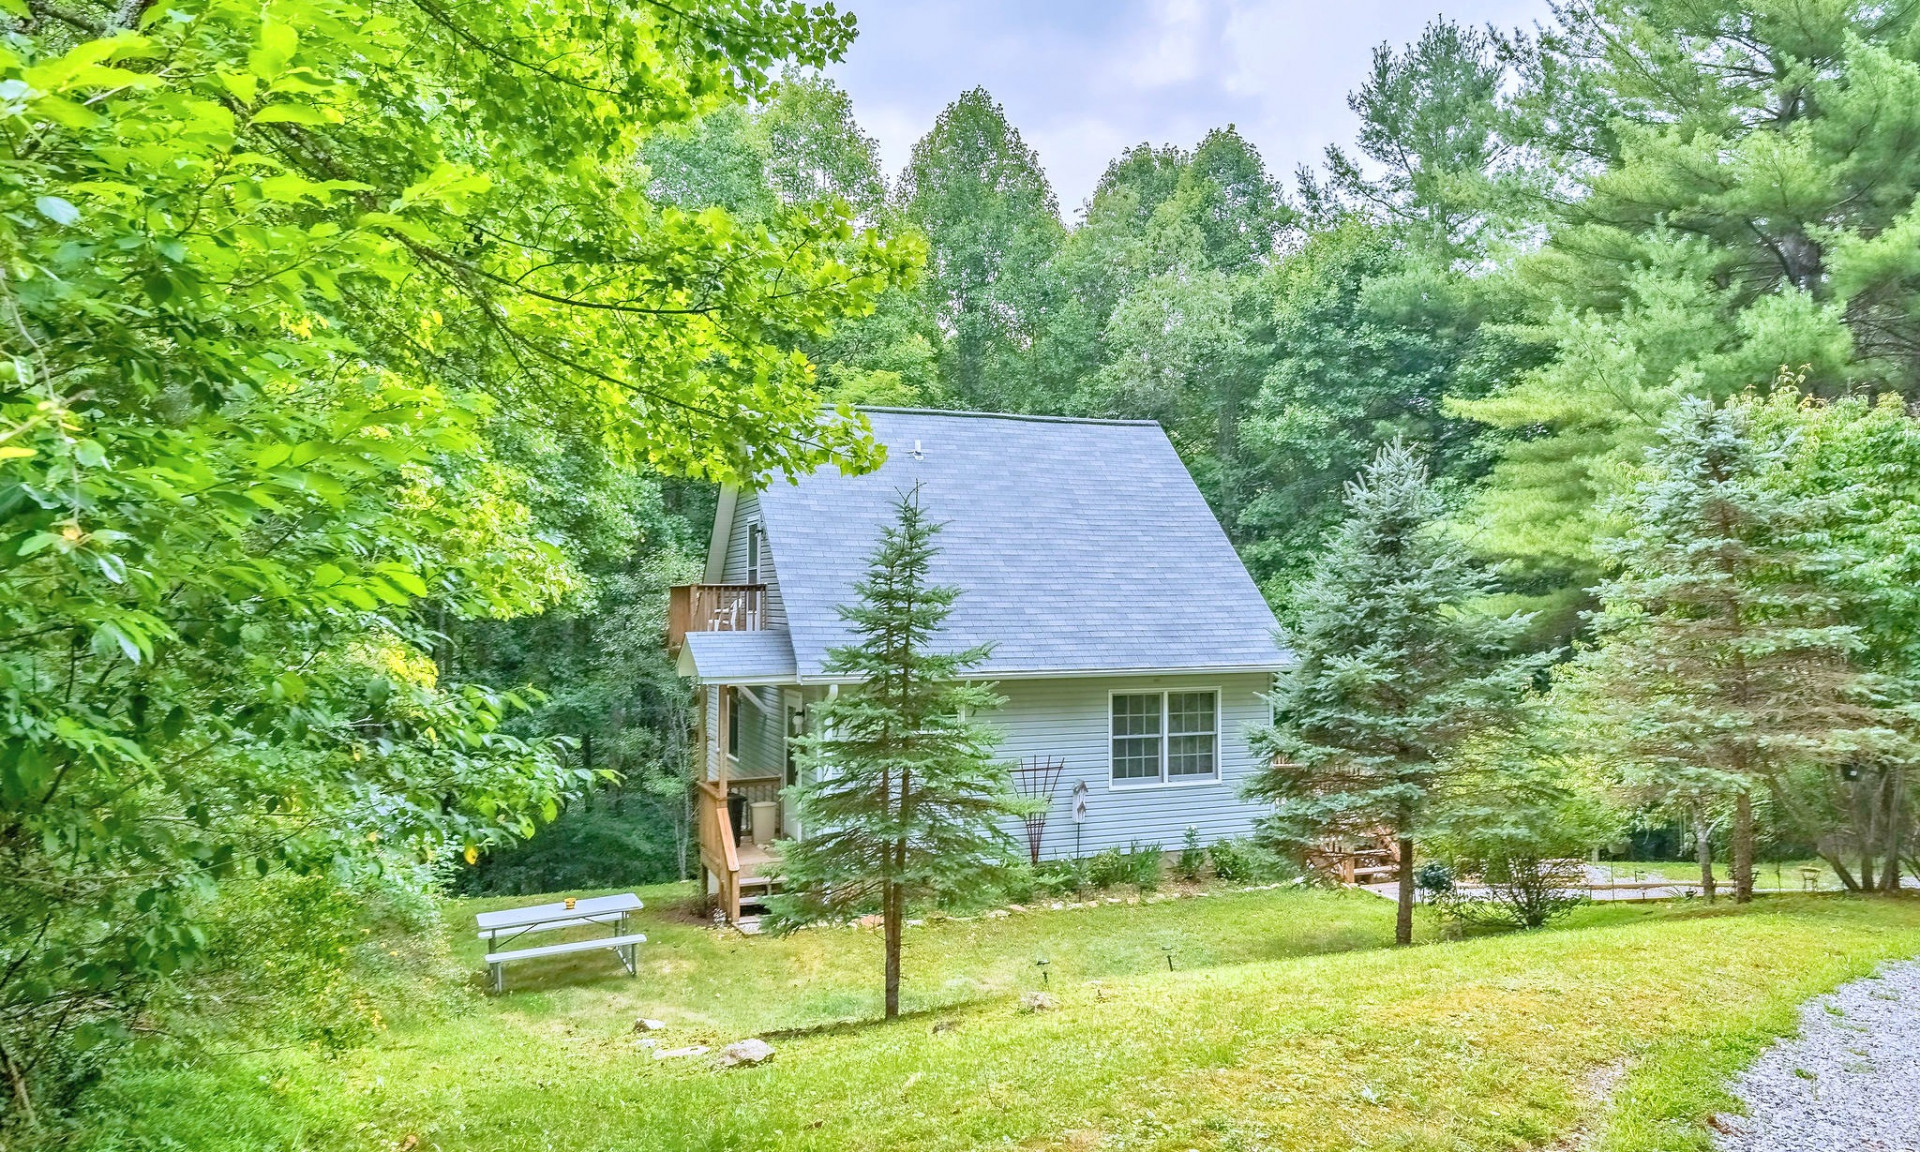 This adorable cottage is tucked back in the woods off of Moon Ridge Road in the Crumpler area of Ashe County in the NC Mountains.